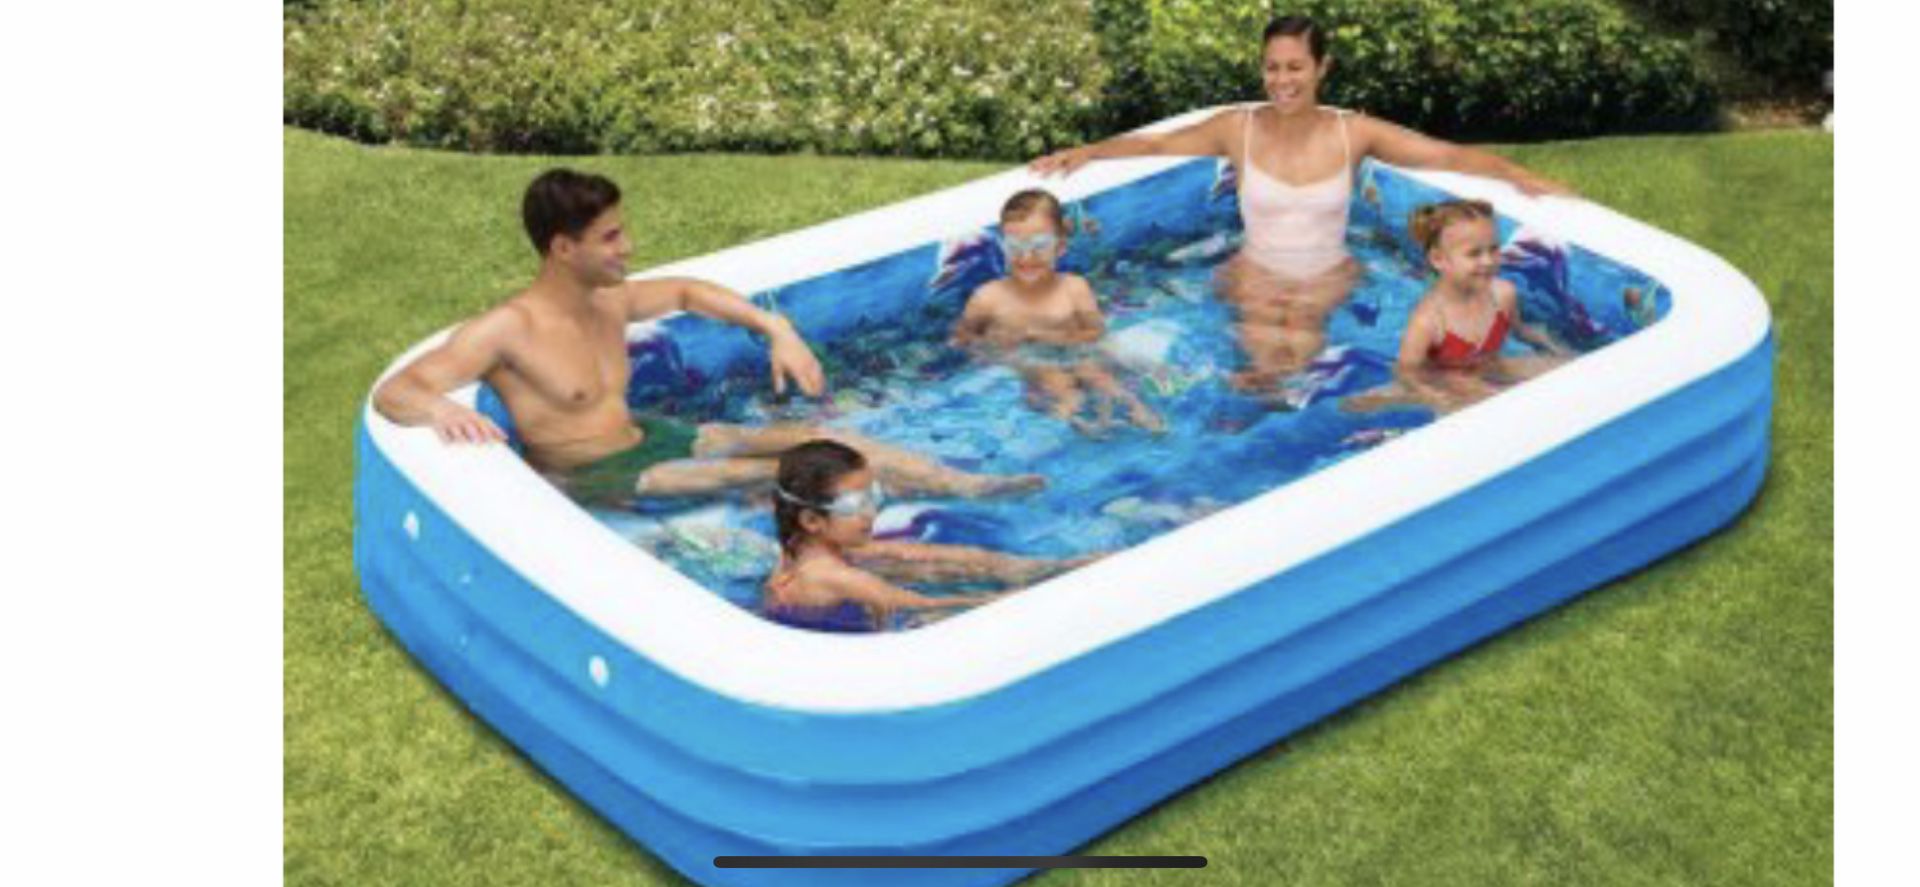 💦💧💧💧New never used, 10 foot 3-D pool super nice New in box ! 💦💦💧💧💧 New in box 10 ft Bonus - comes with 2 pair of goggles! Included ! Ready for summe